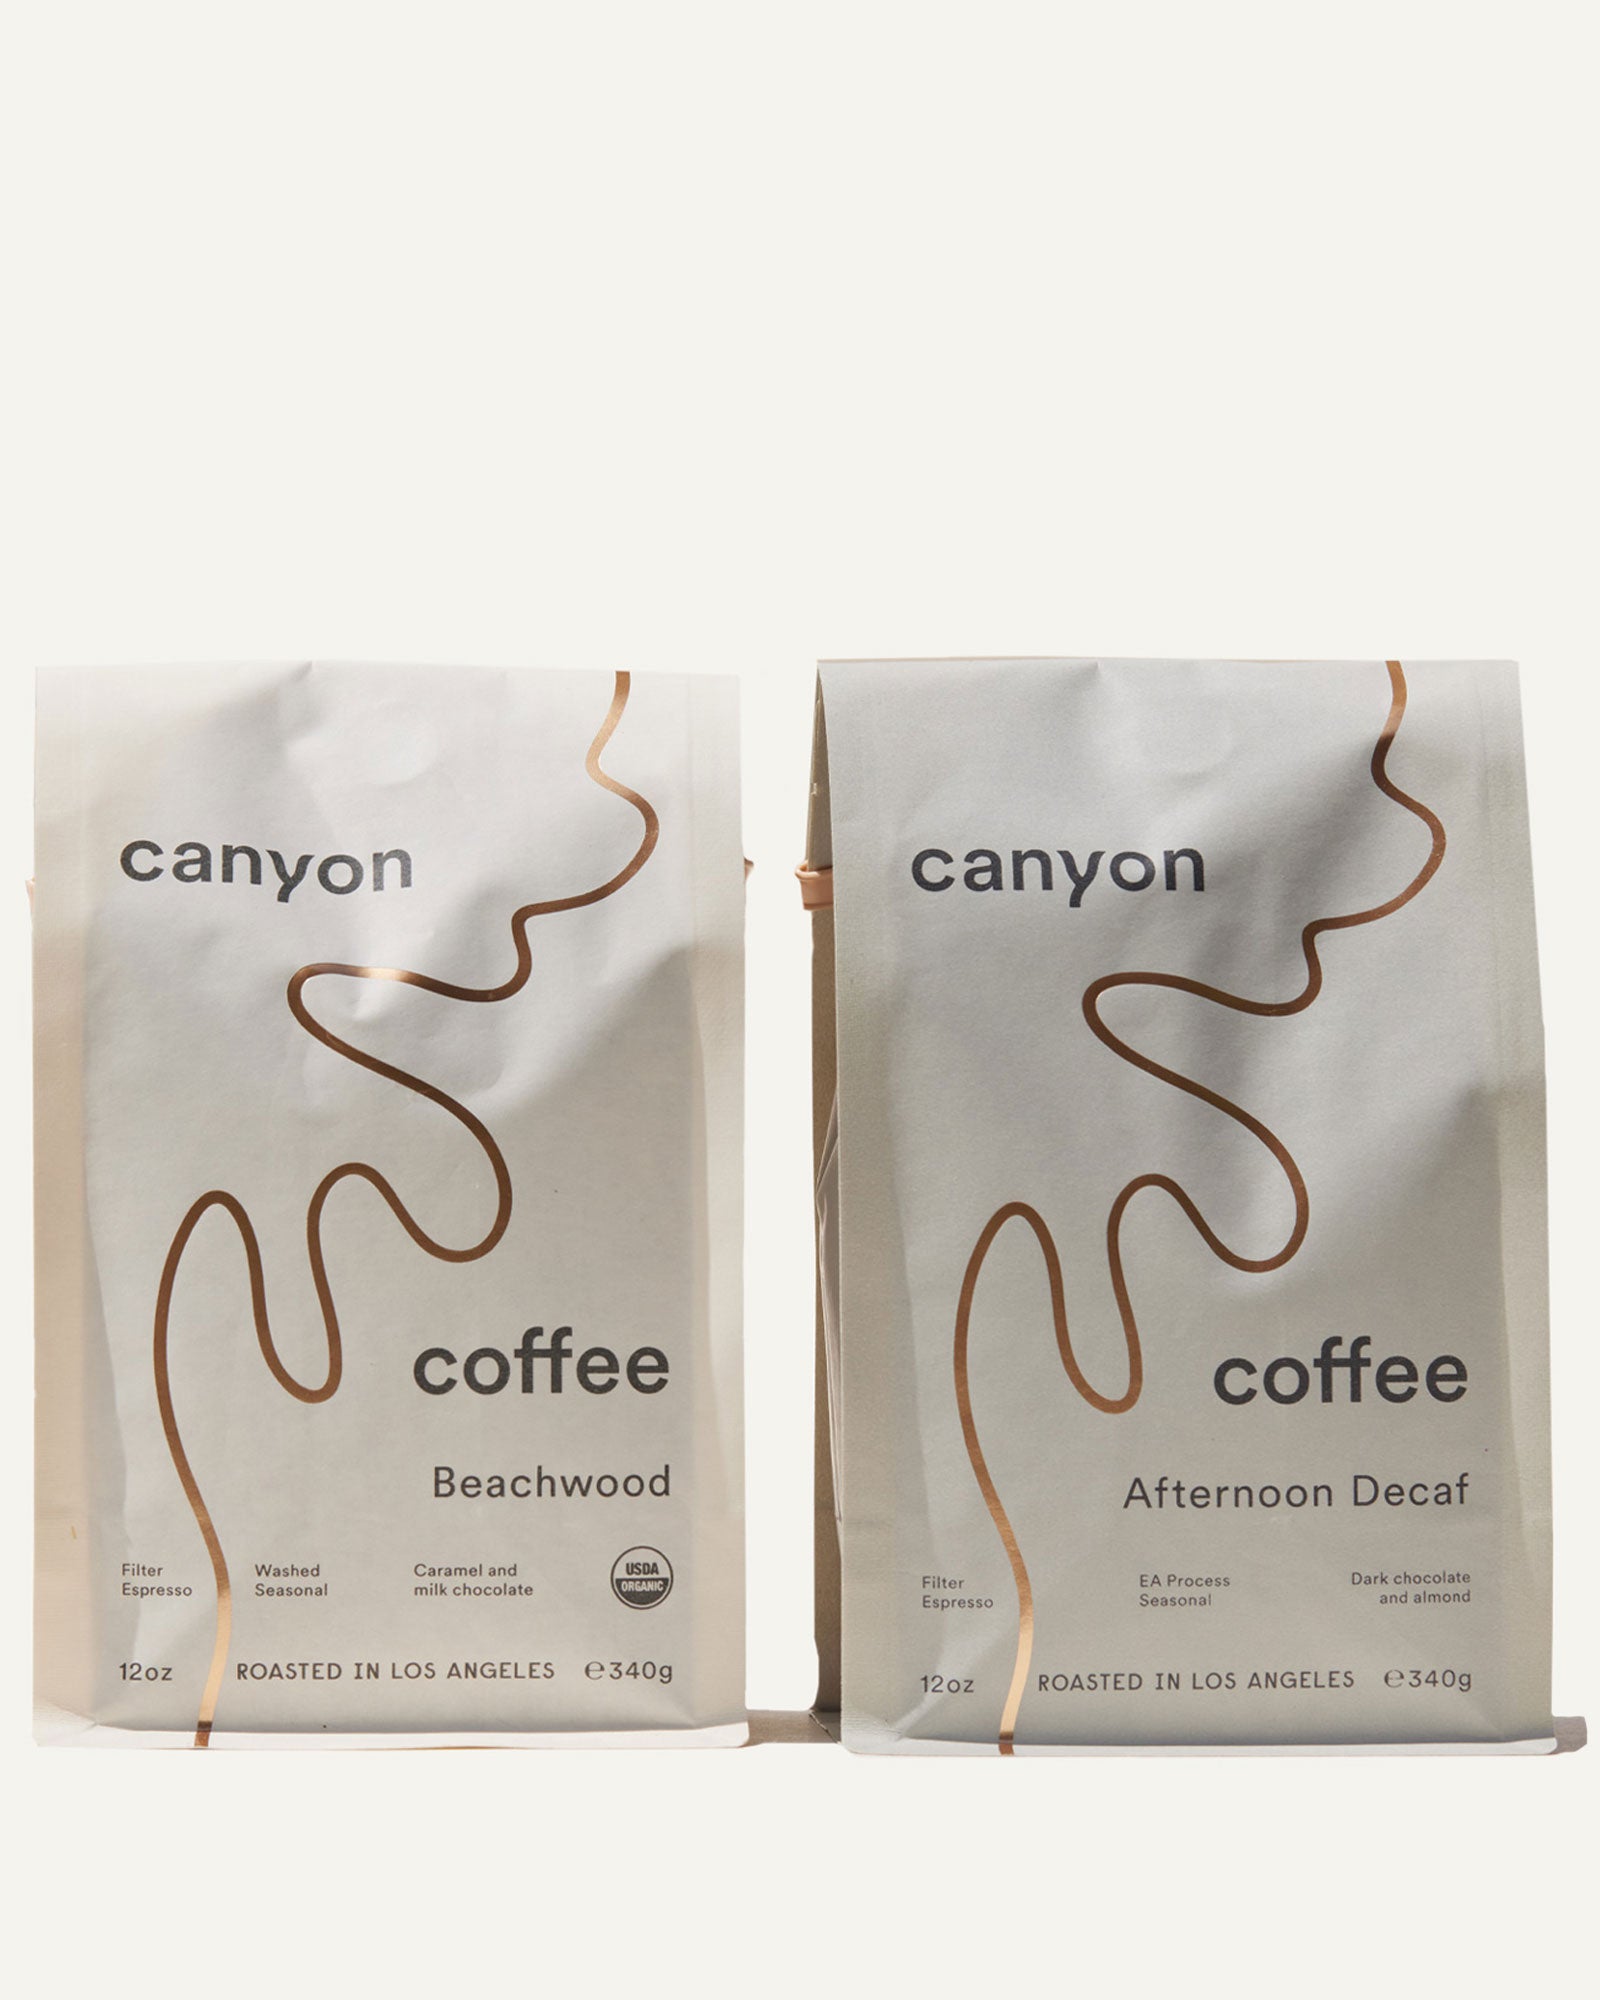 Two bags of Canyon Coffee with gold foil